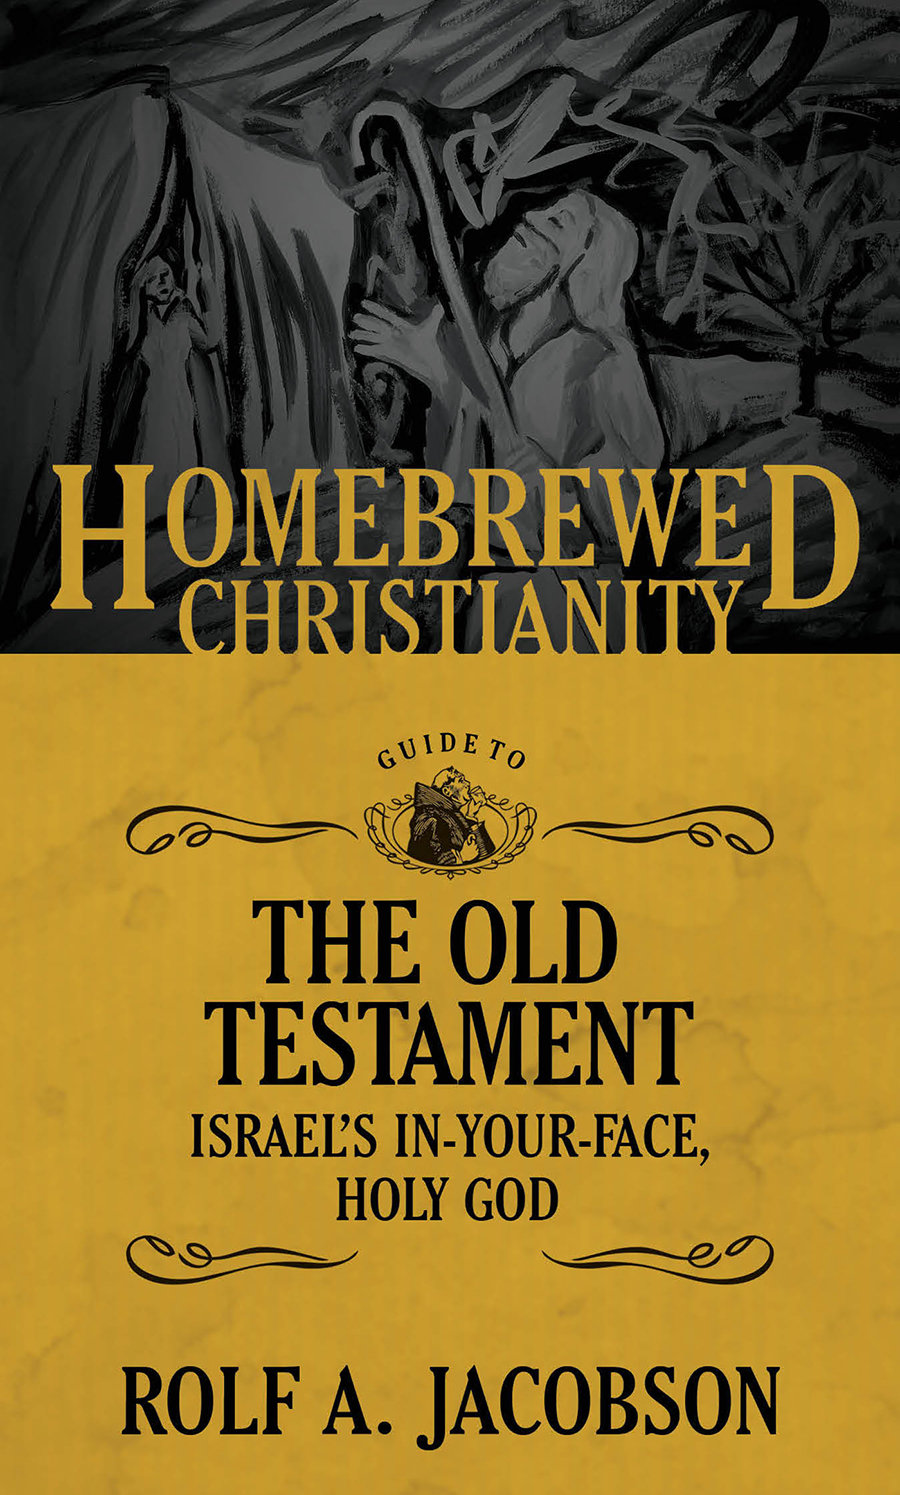 The Homebrewed Christianity Guide to the Old Testament: Israel's In-Your-Face, Holy God